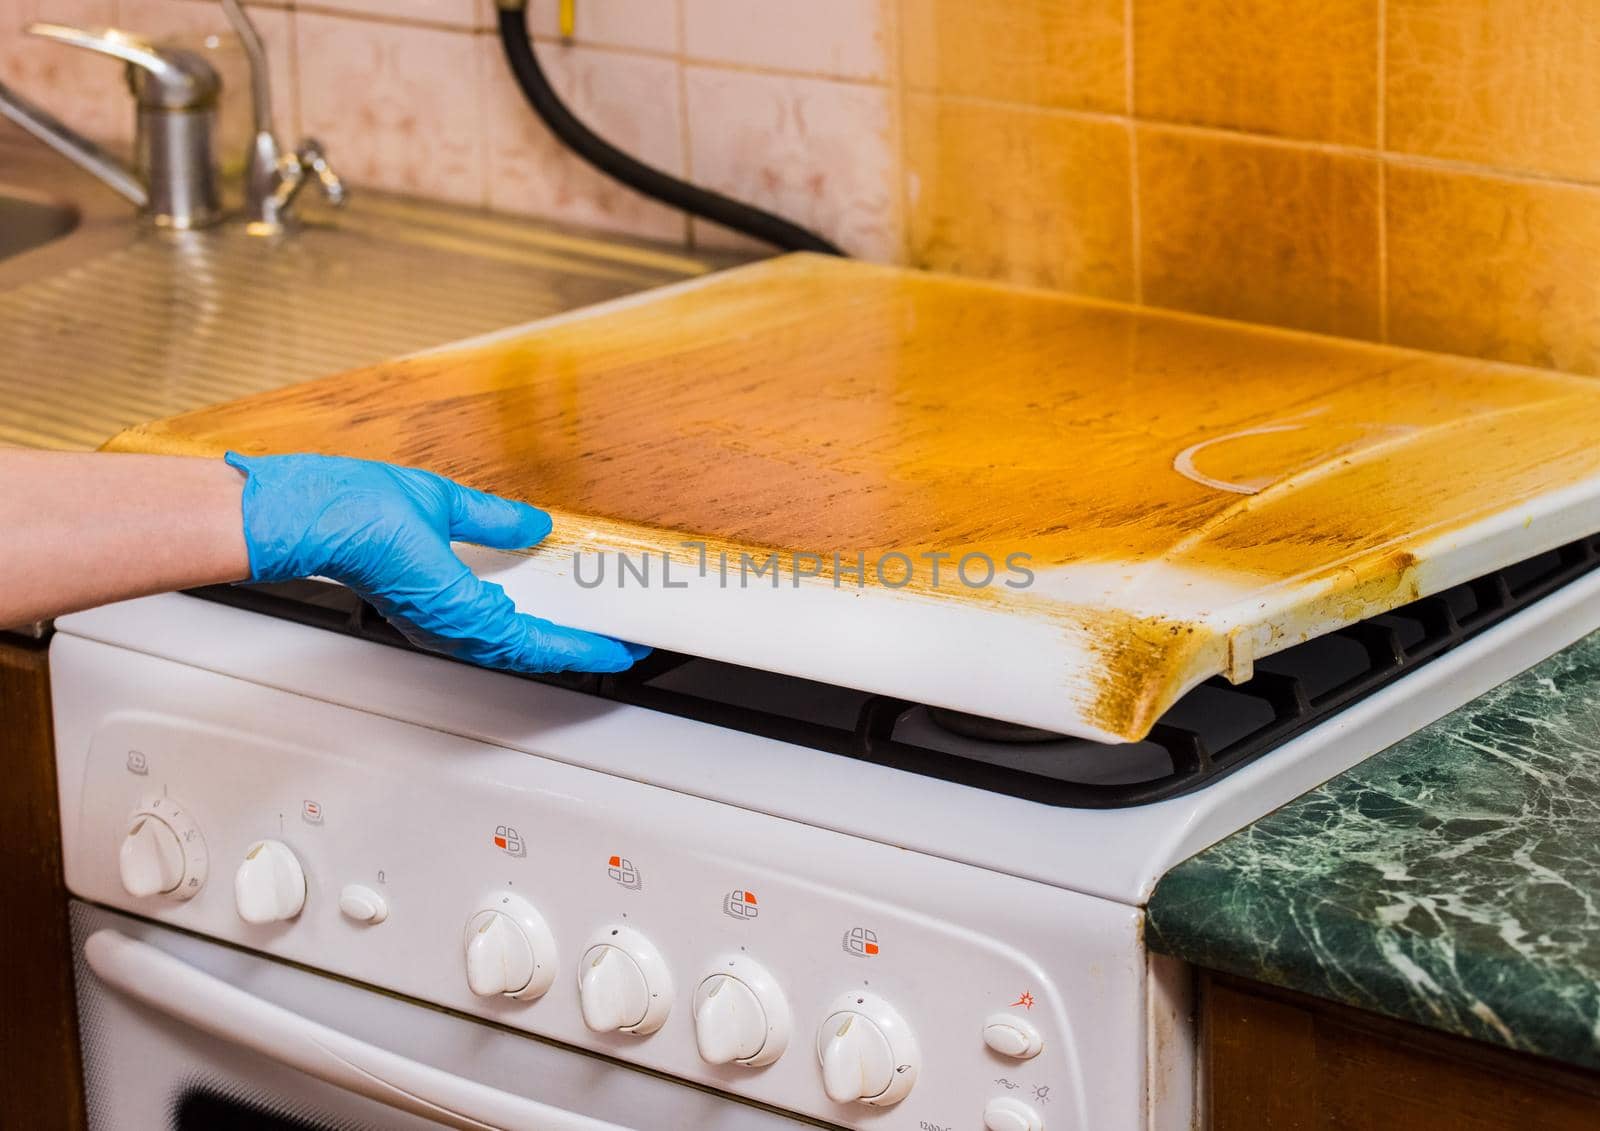 A woman's hand of a housewife in a household rubber glove holds the lid of a dirty gas stove with a sticky coating. Home cleaning of the kitchen.